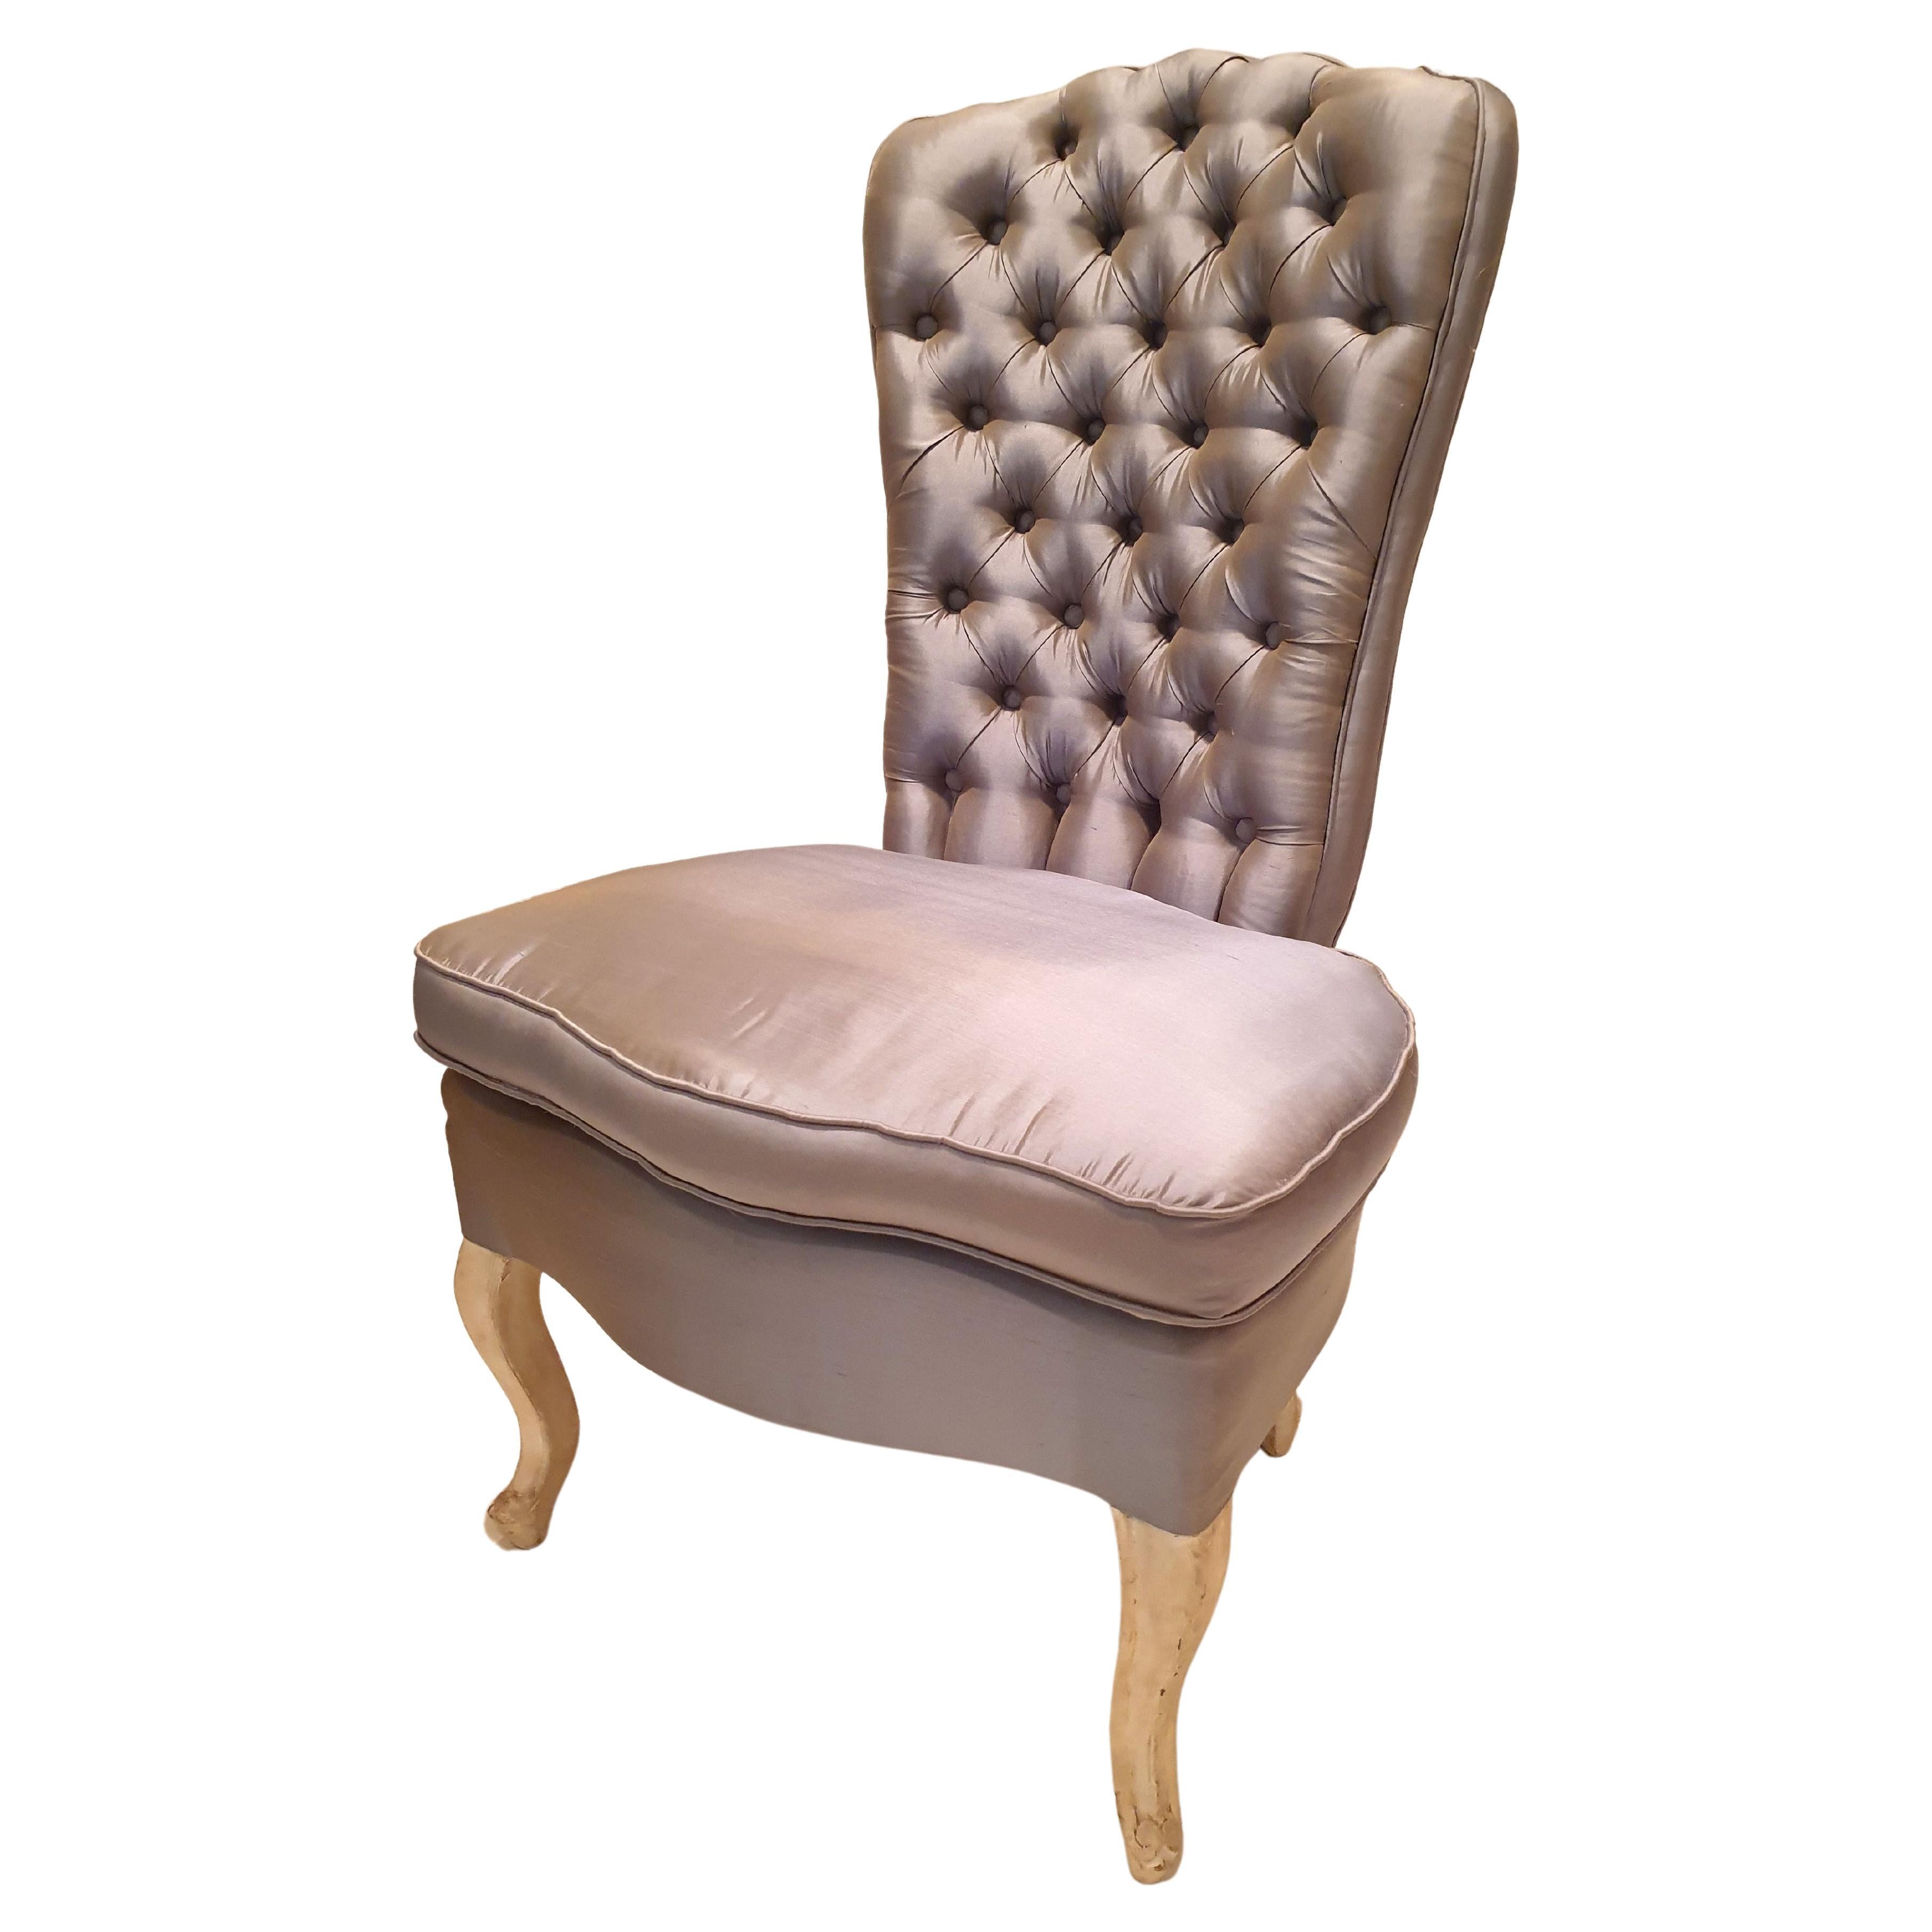 Mid-Century Modern, Shabby Chic Silk Upholstered Chair For Sale